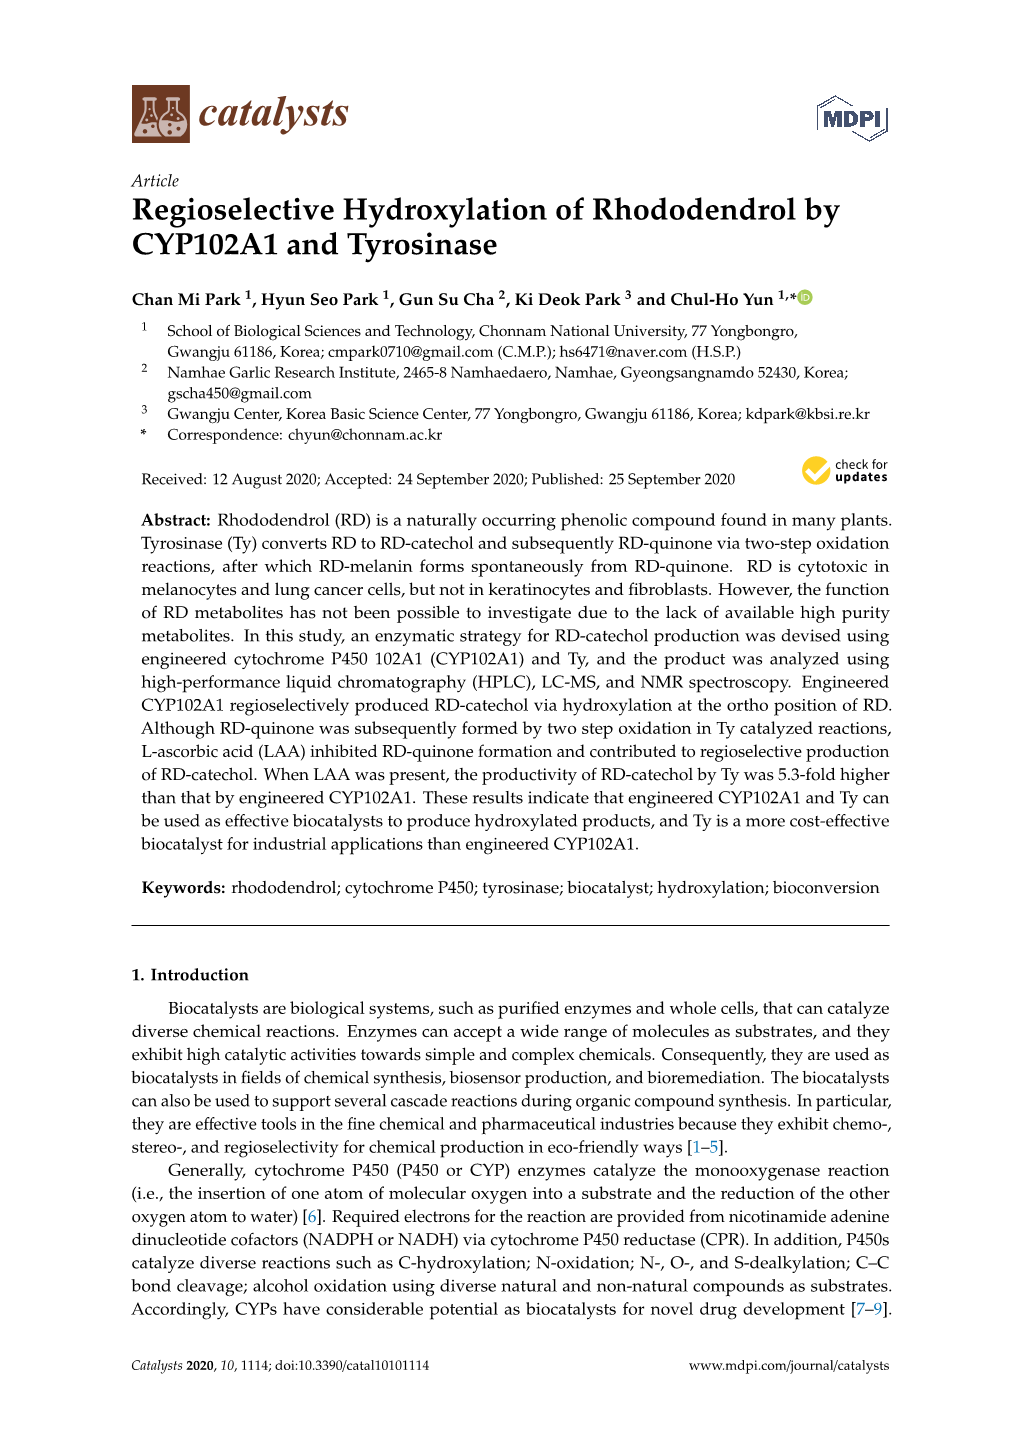 Regioselective Hydroxylation of Rhododendrol by CYP102A1 and Tyrosinase